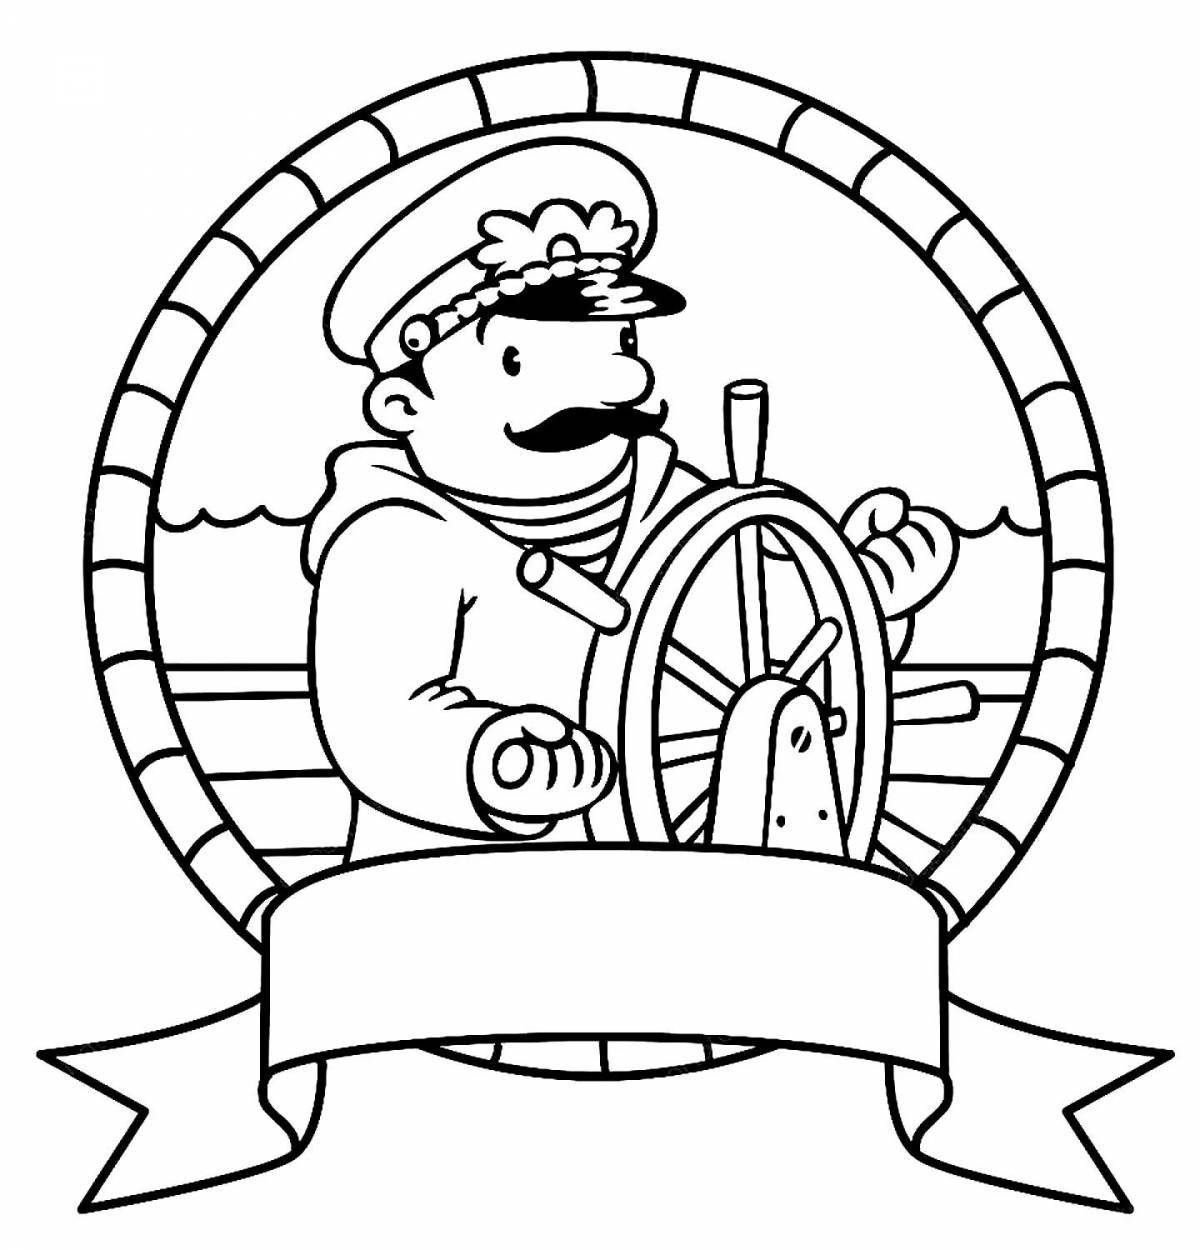 Colorful-sailor-fantasy sailor coloring book for kids